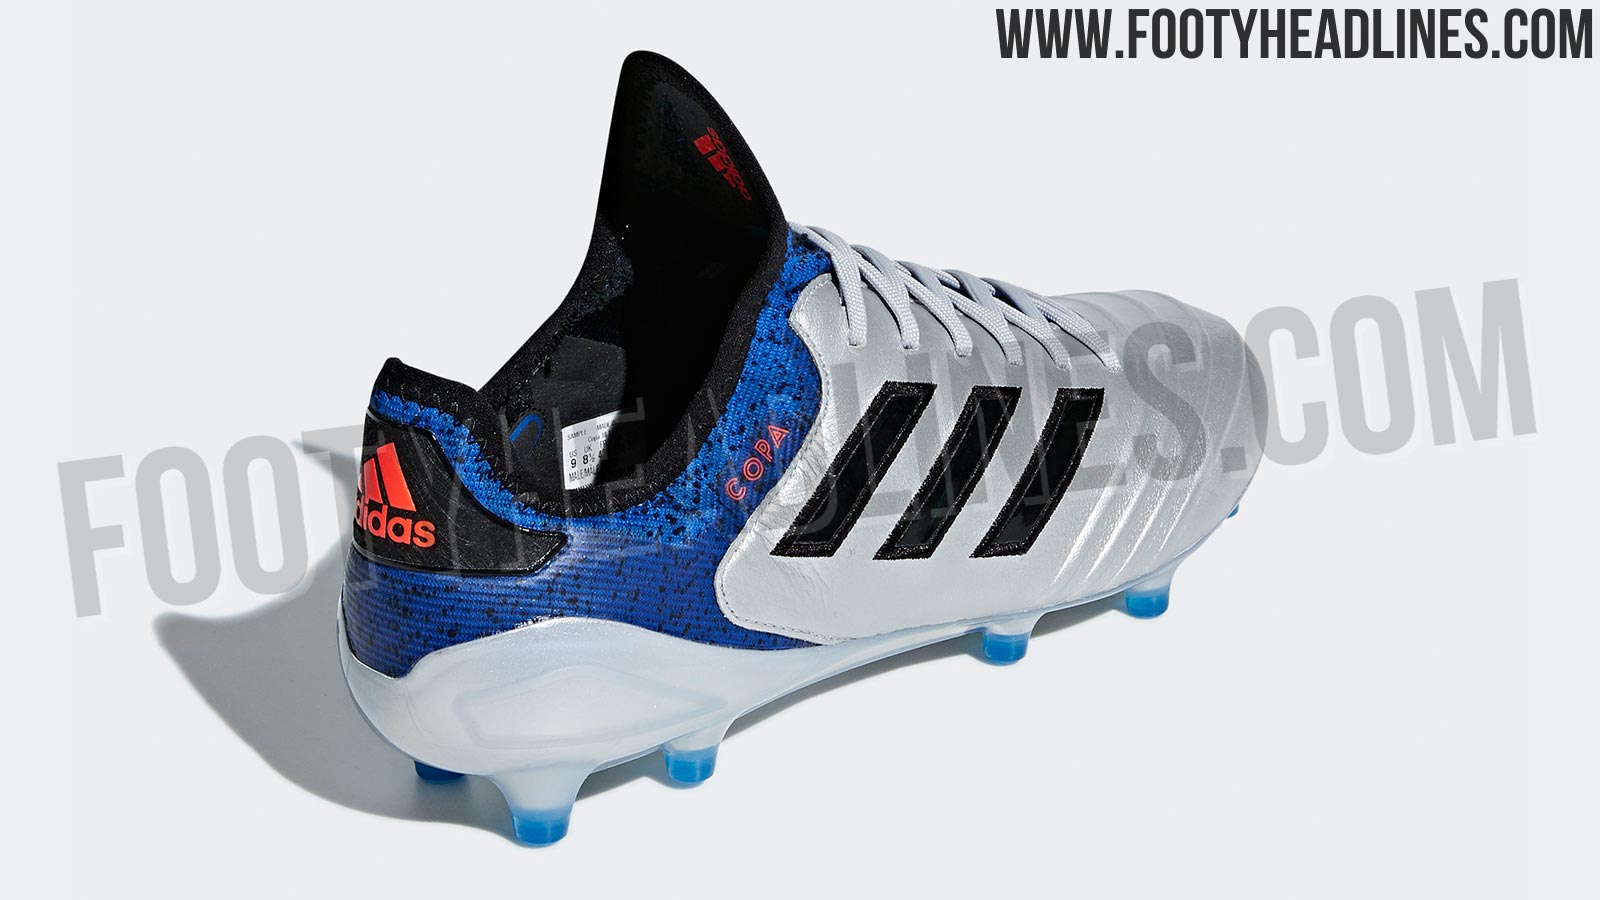 Pure Class: Adidas Copa 'Team Mode' Boots Leaked - Headlines